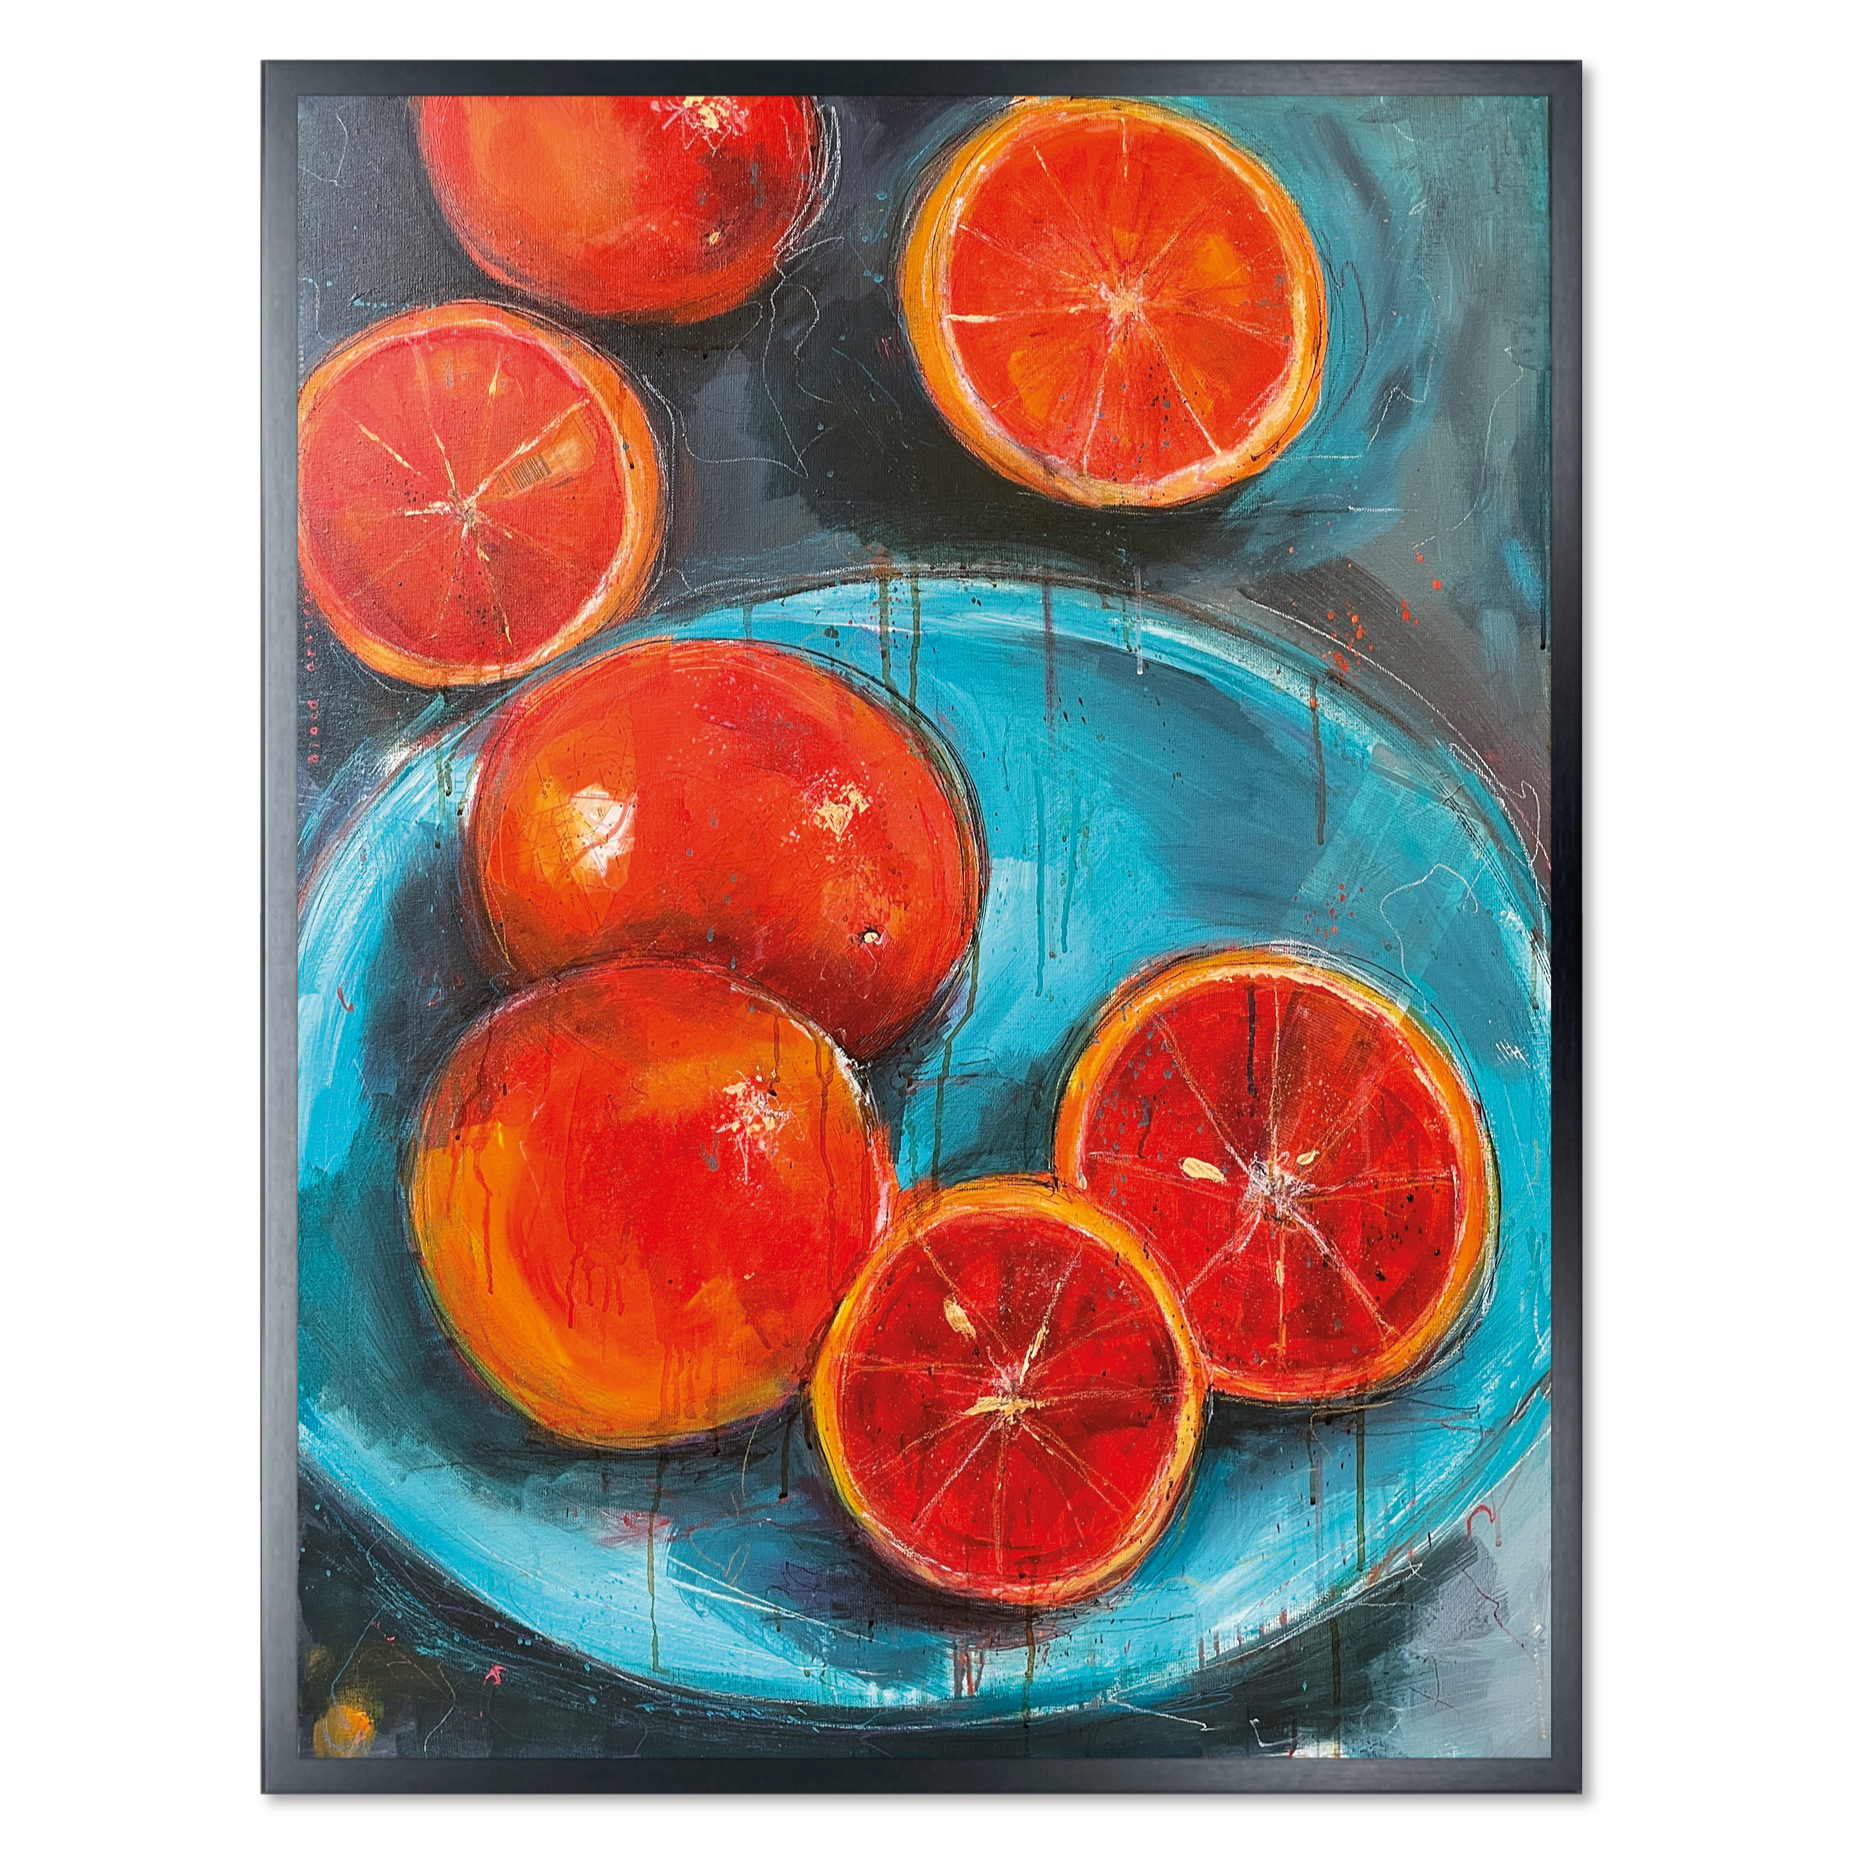 Large mixed media painting of blood oranges by emma sherry